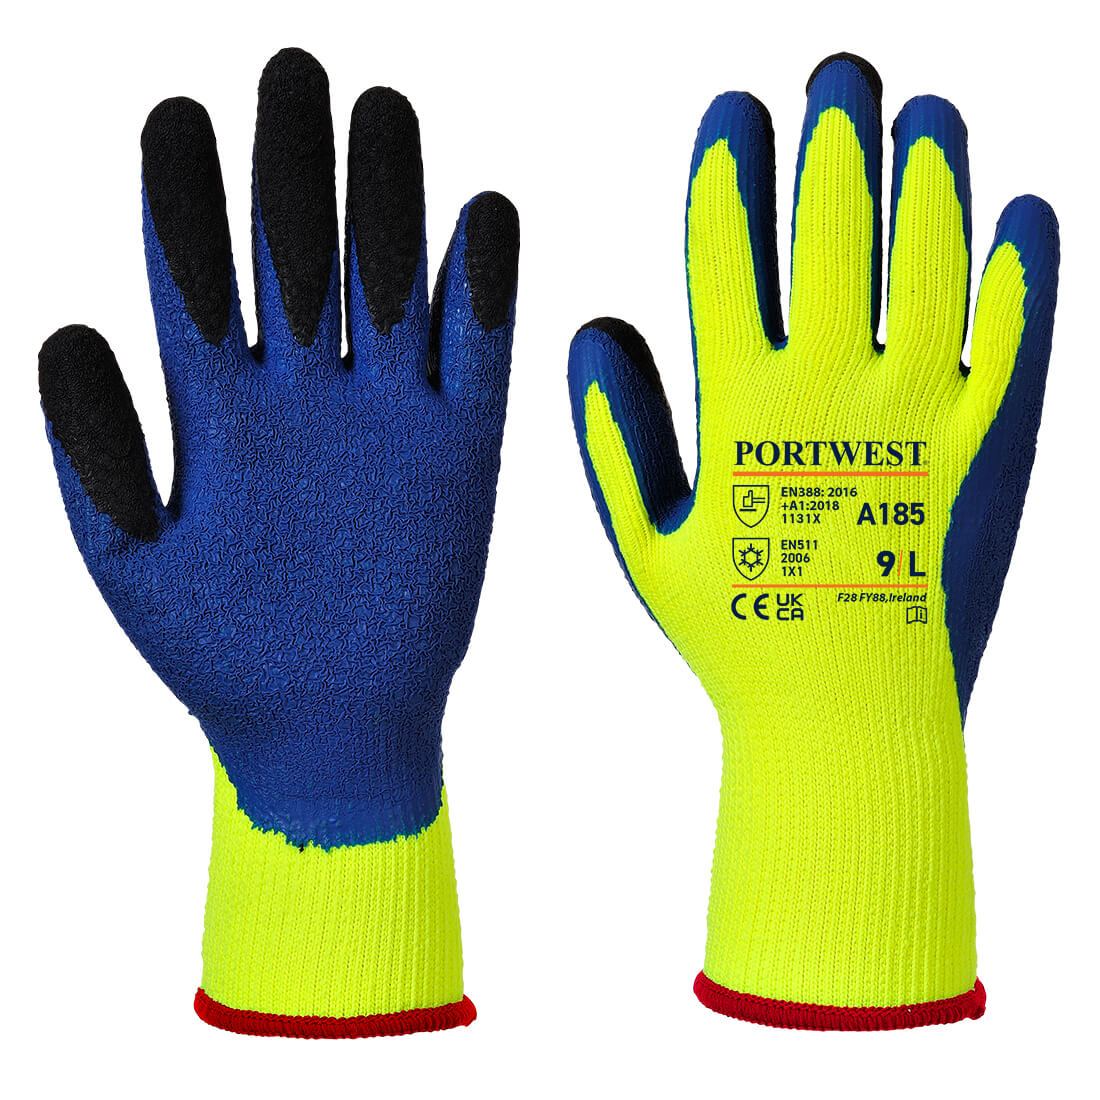 A185 DUO-THERM WINTER GLOVES - PORTWEST